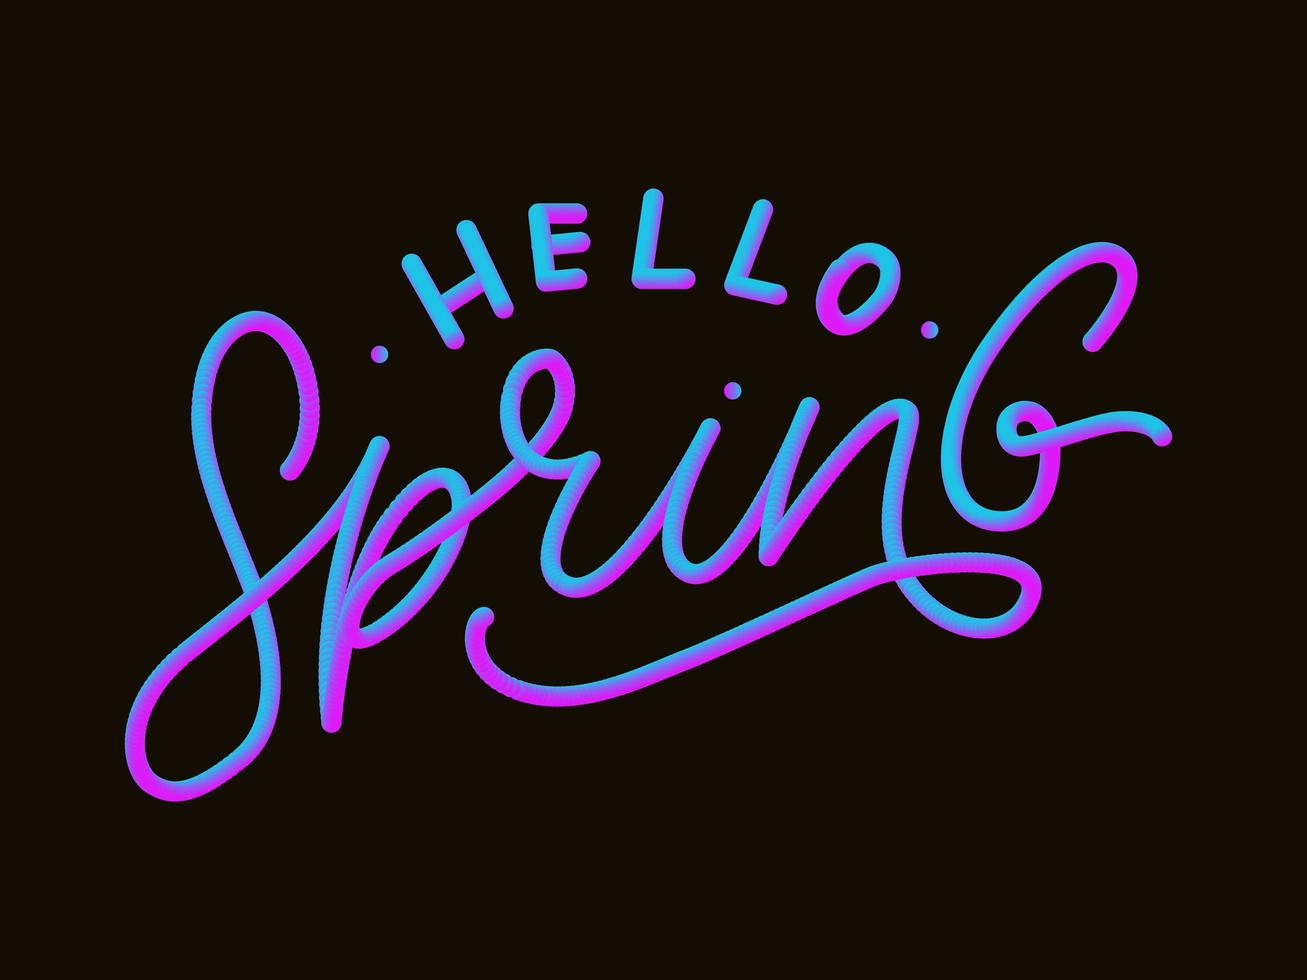 Hello Spring Flowers Text Background Frame lettering slogan vector